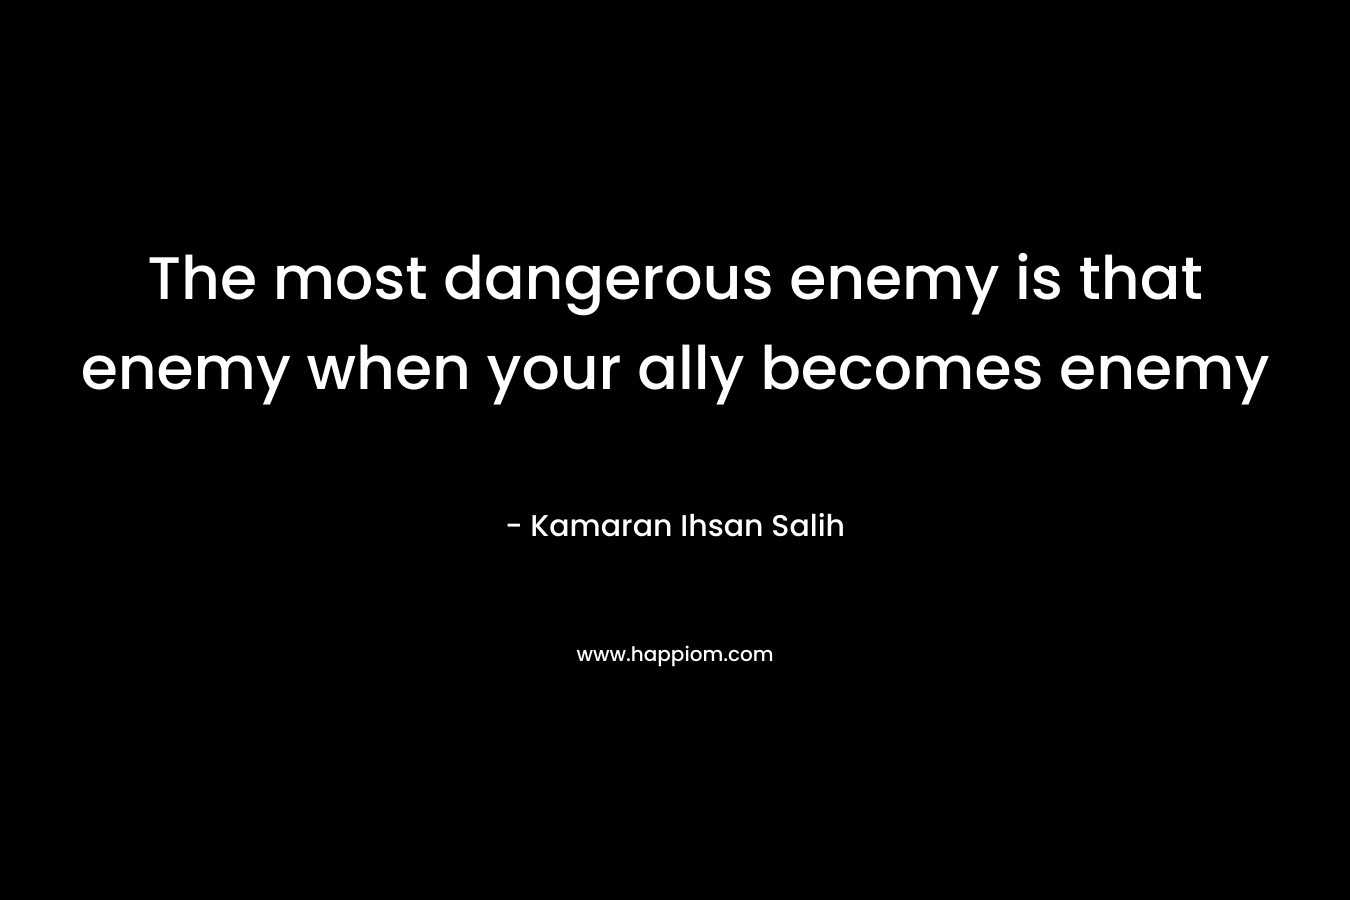 The most dangerous enemy is that enemy when your ally becomes enemy